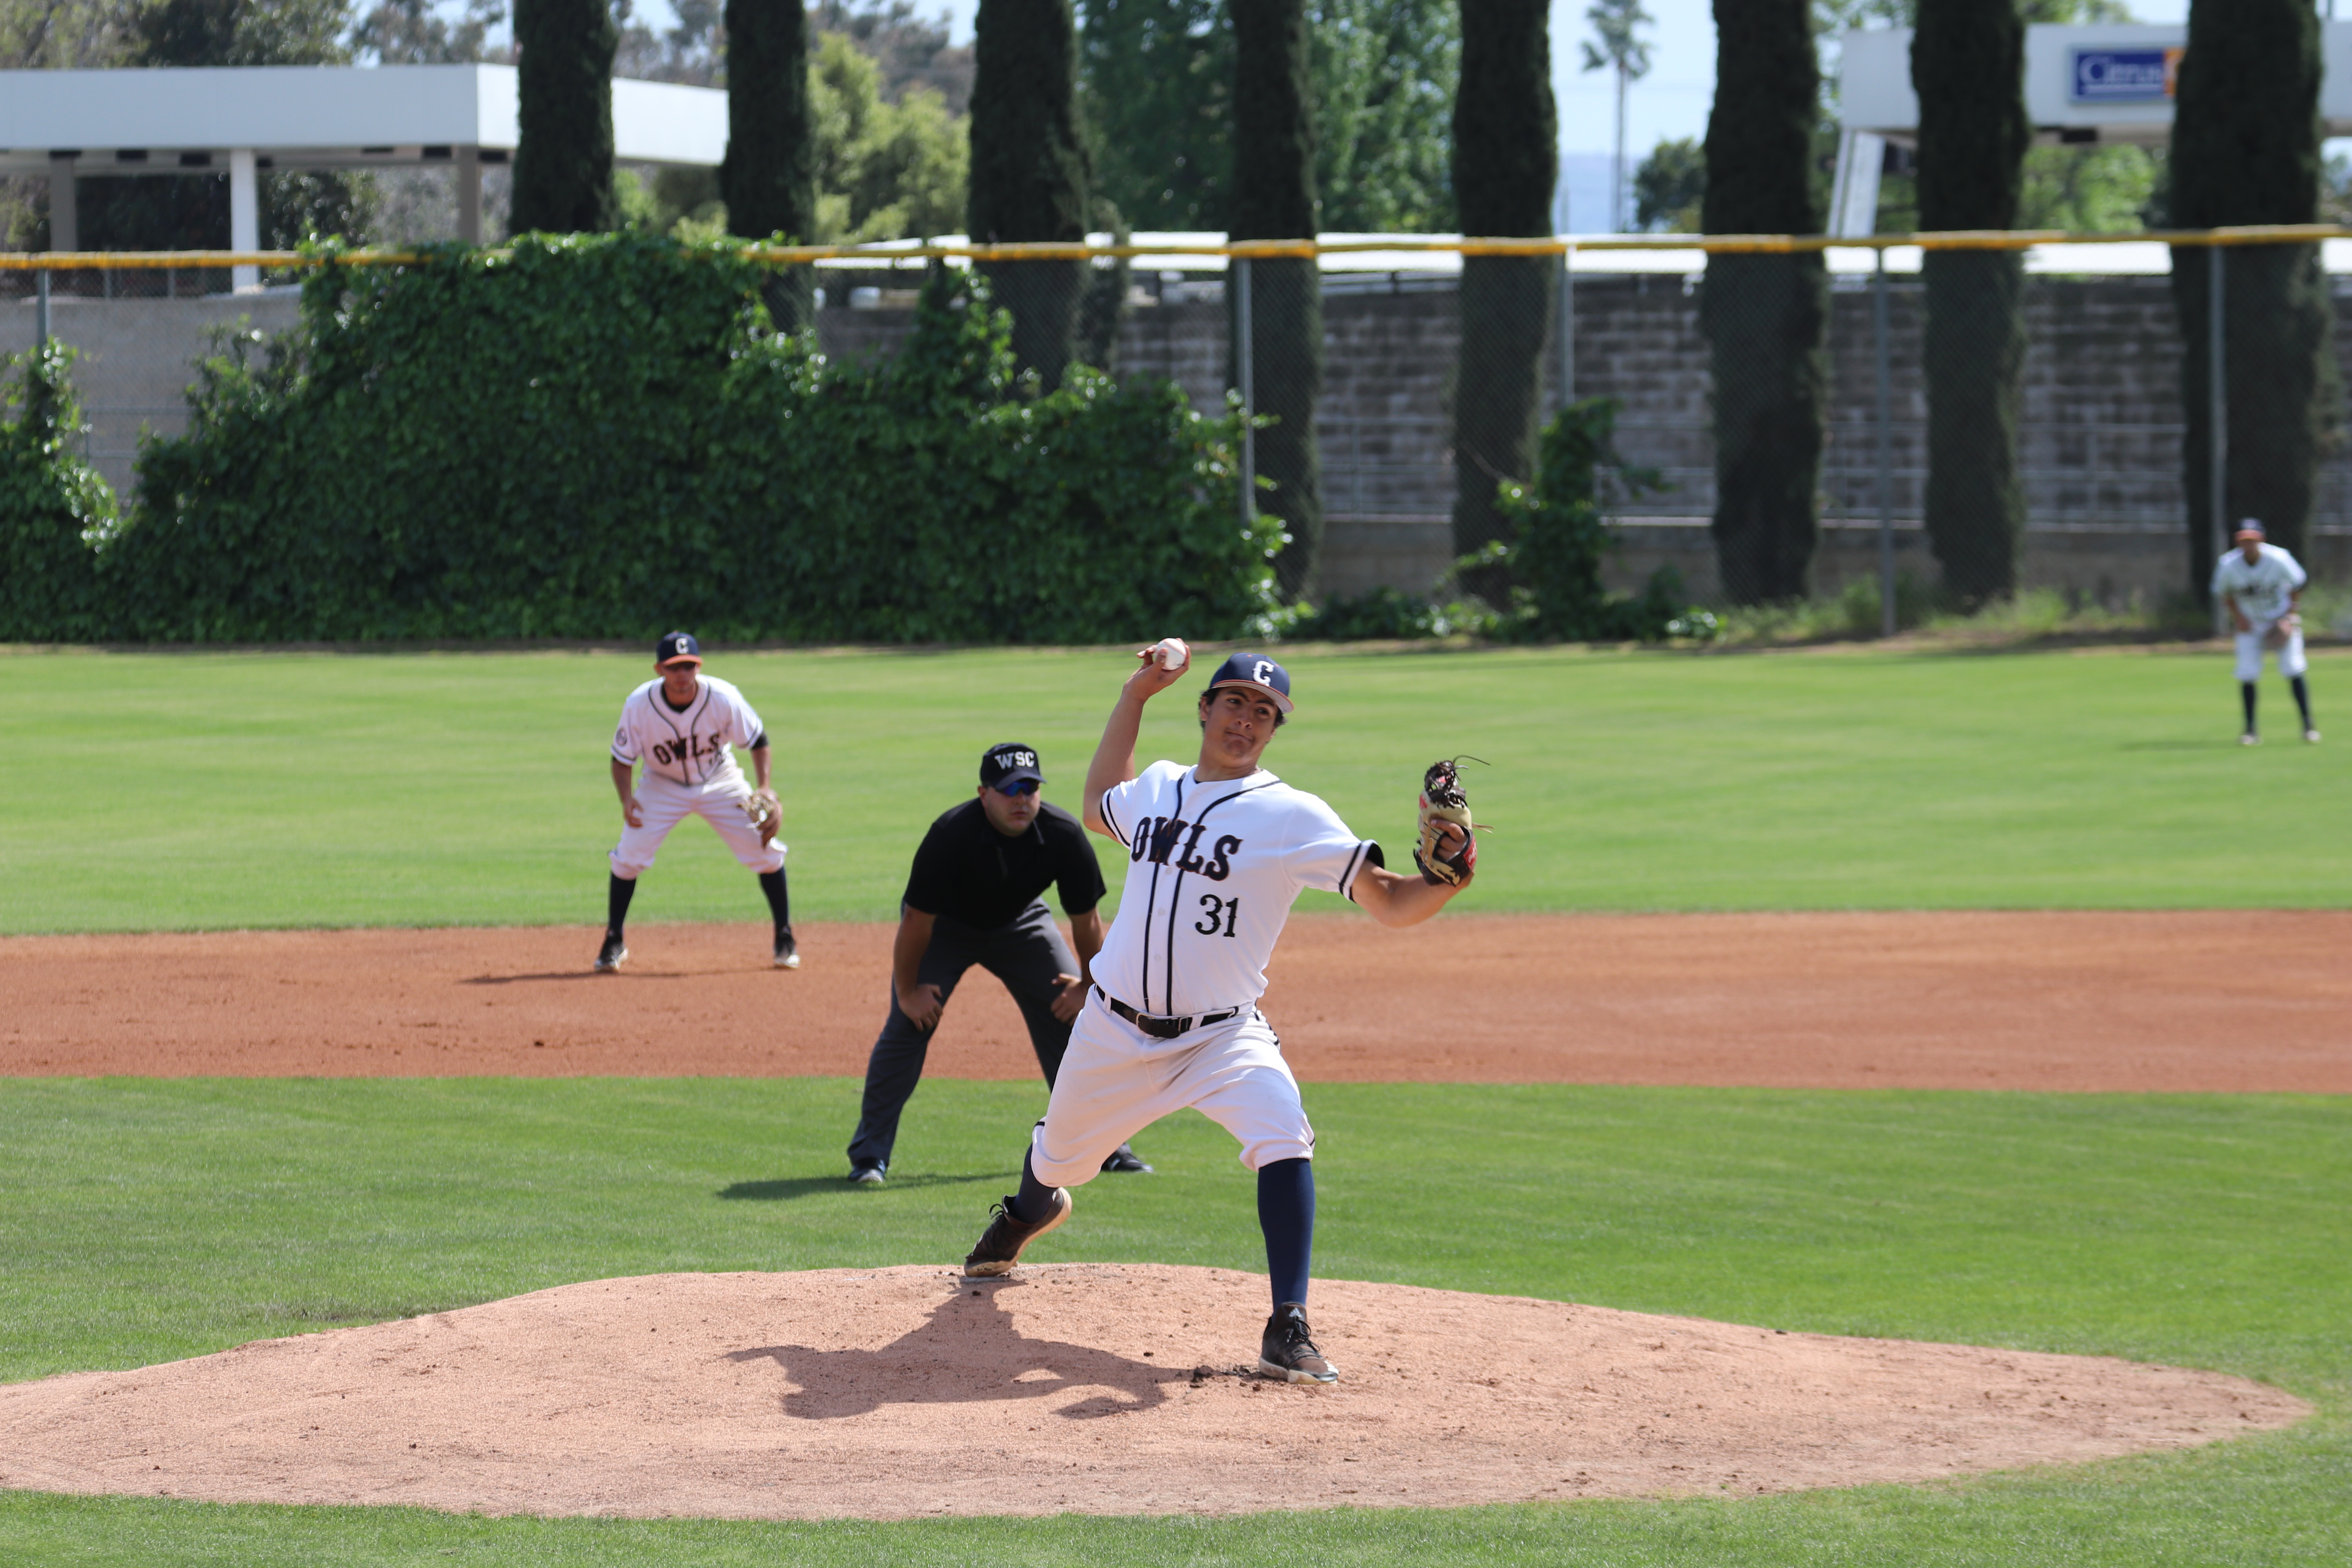 Pitching secures win for Owls in first game of series with Barstow College